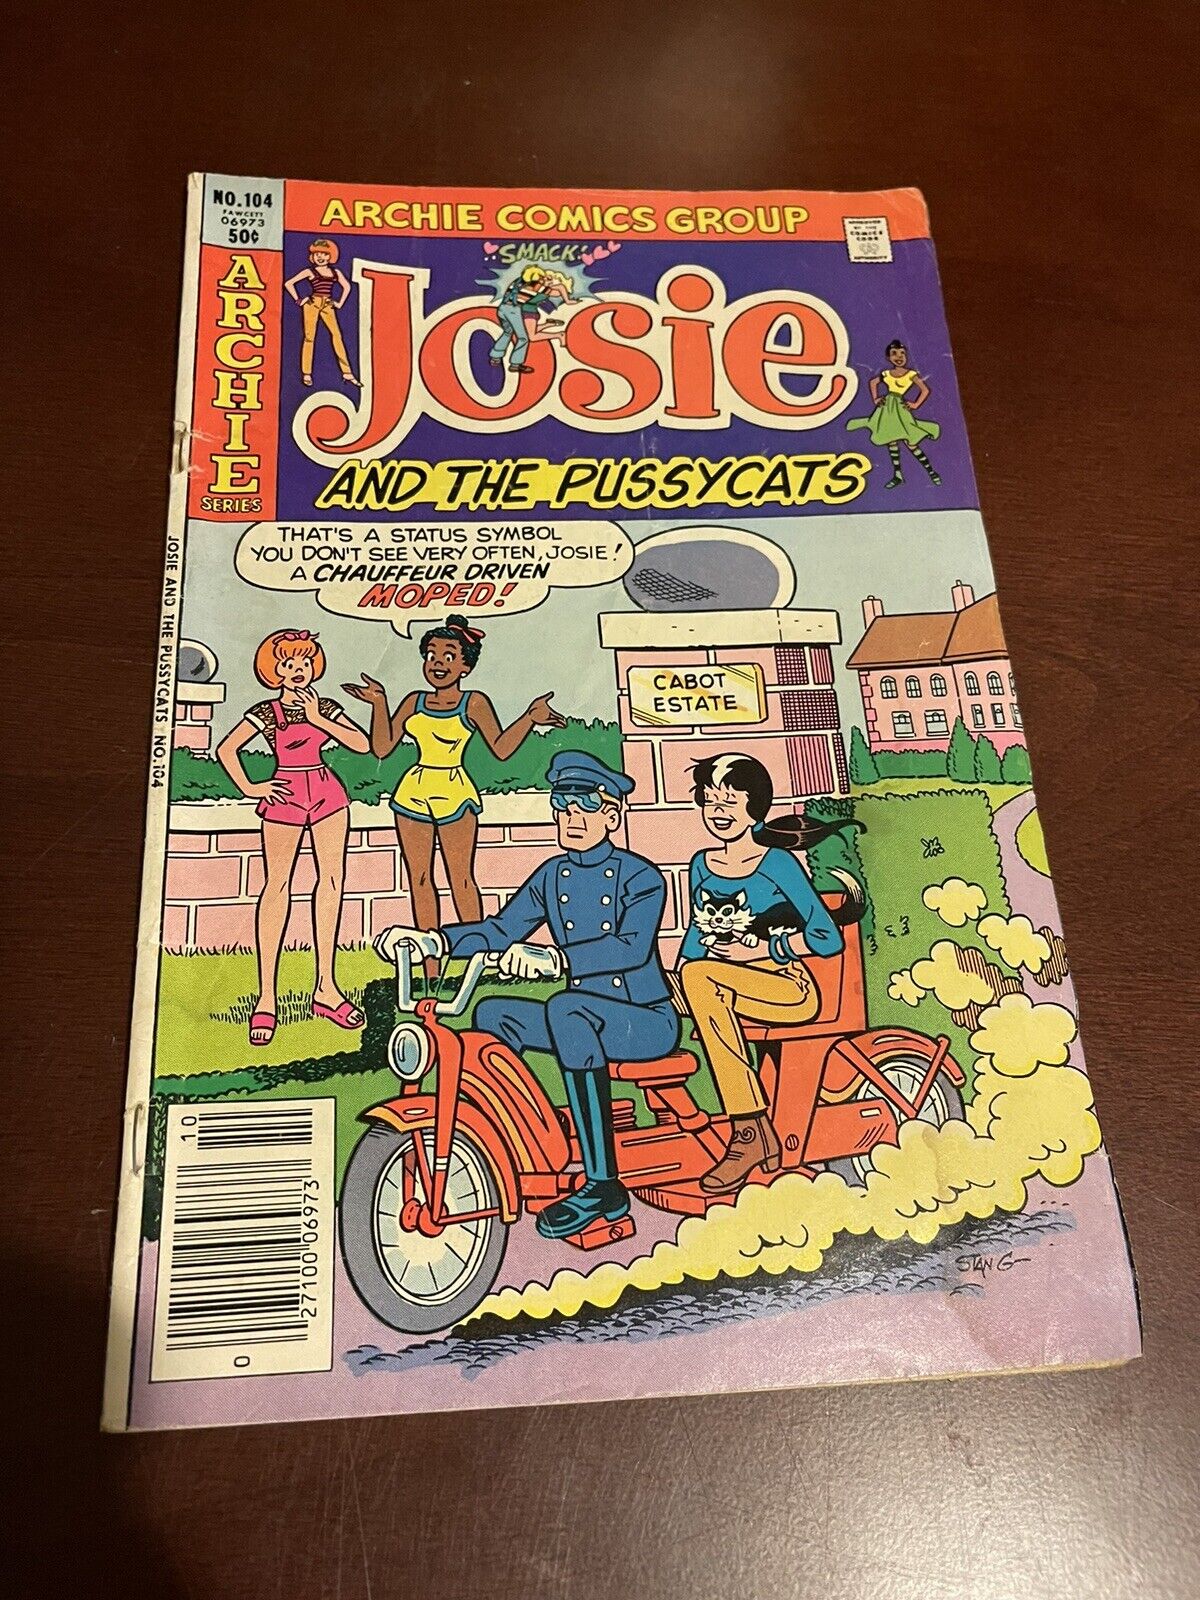 Josie and the Pussycats comic book #104 Archie Comics Group October 1981